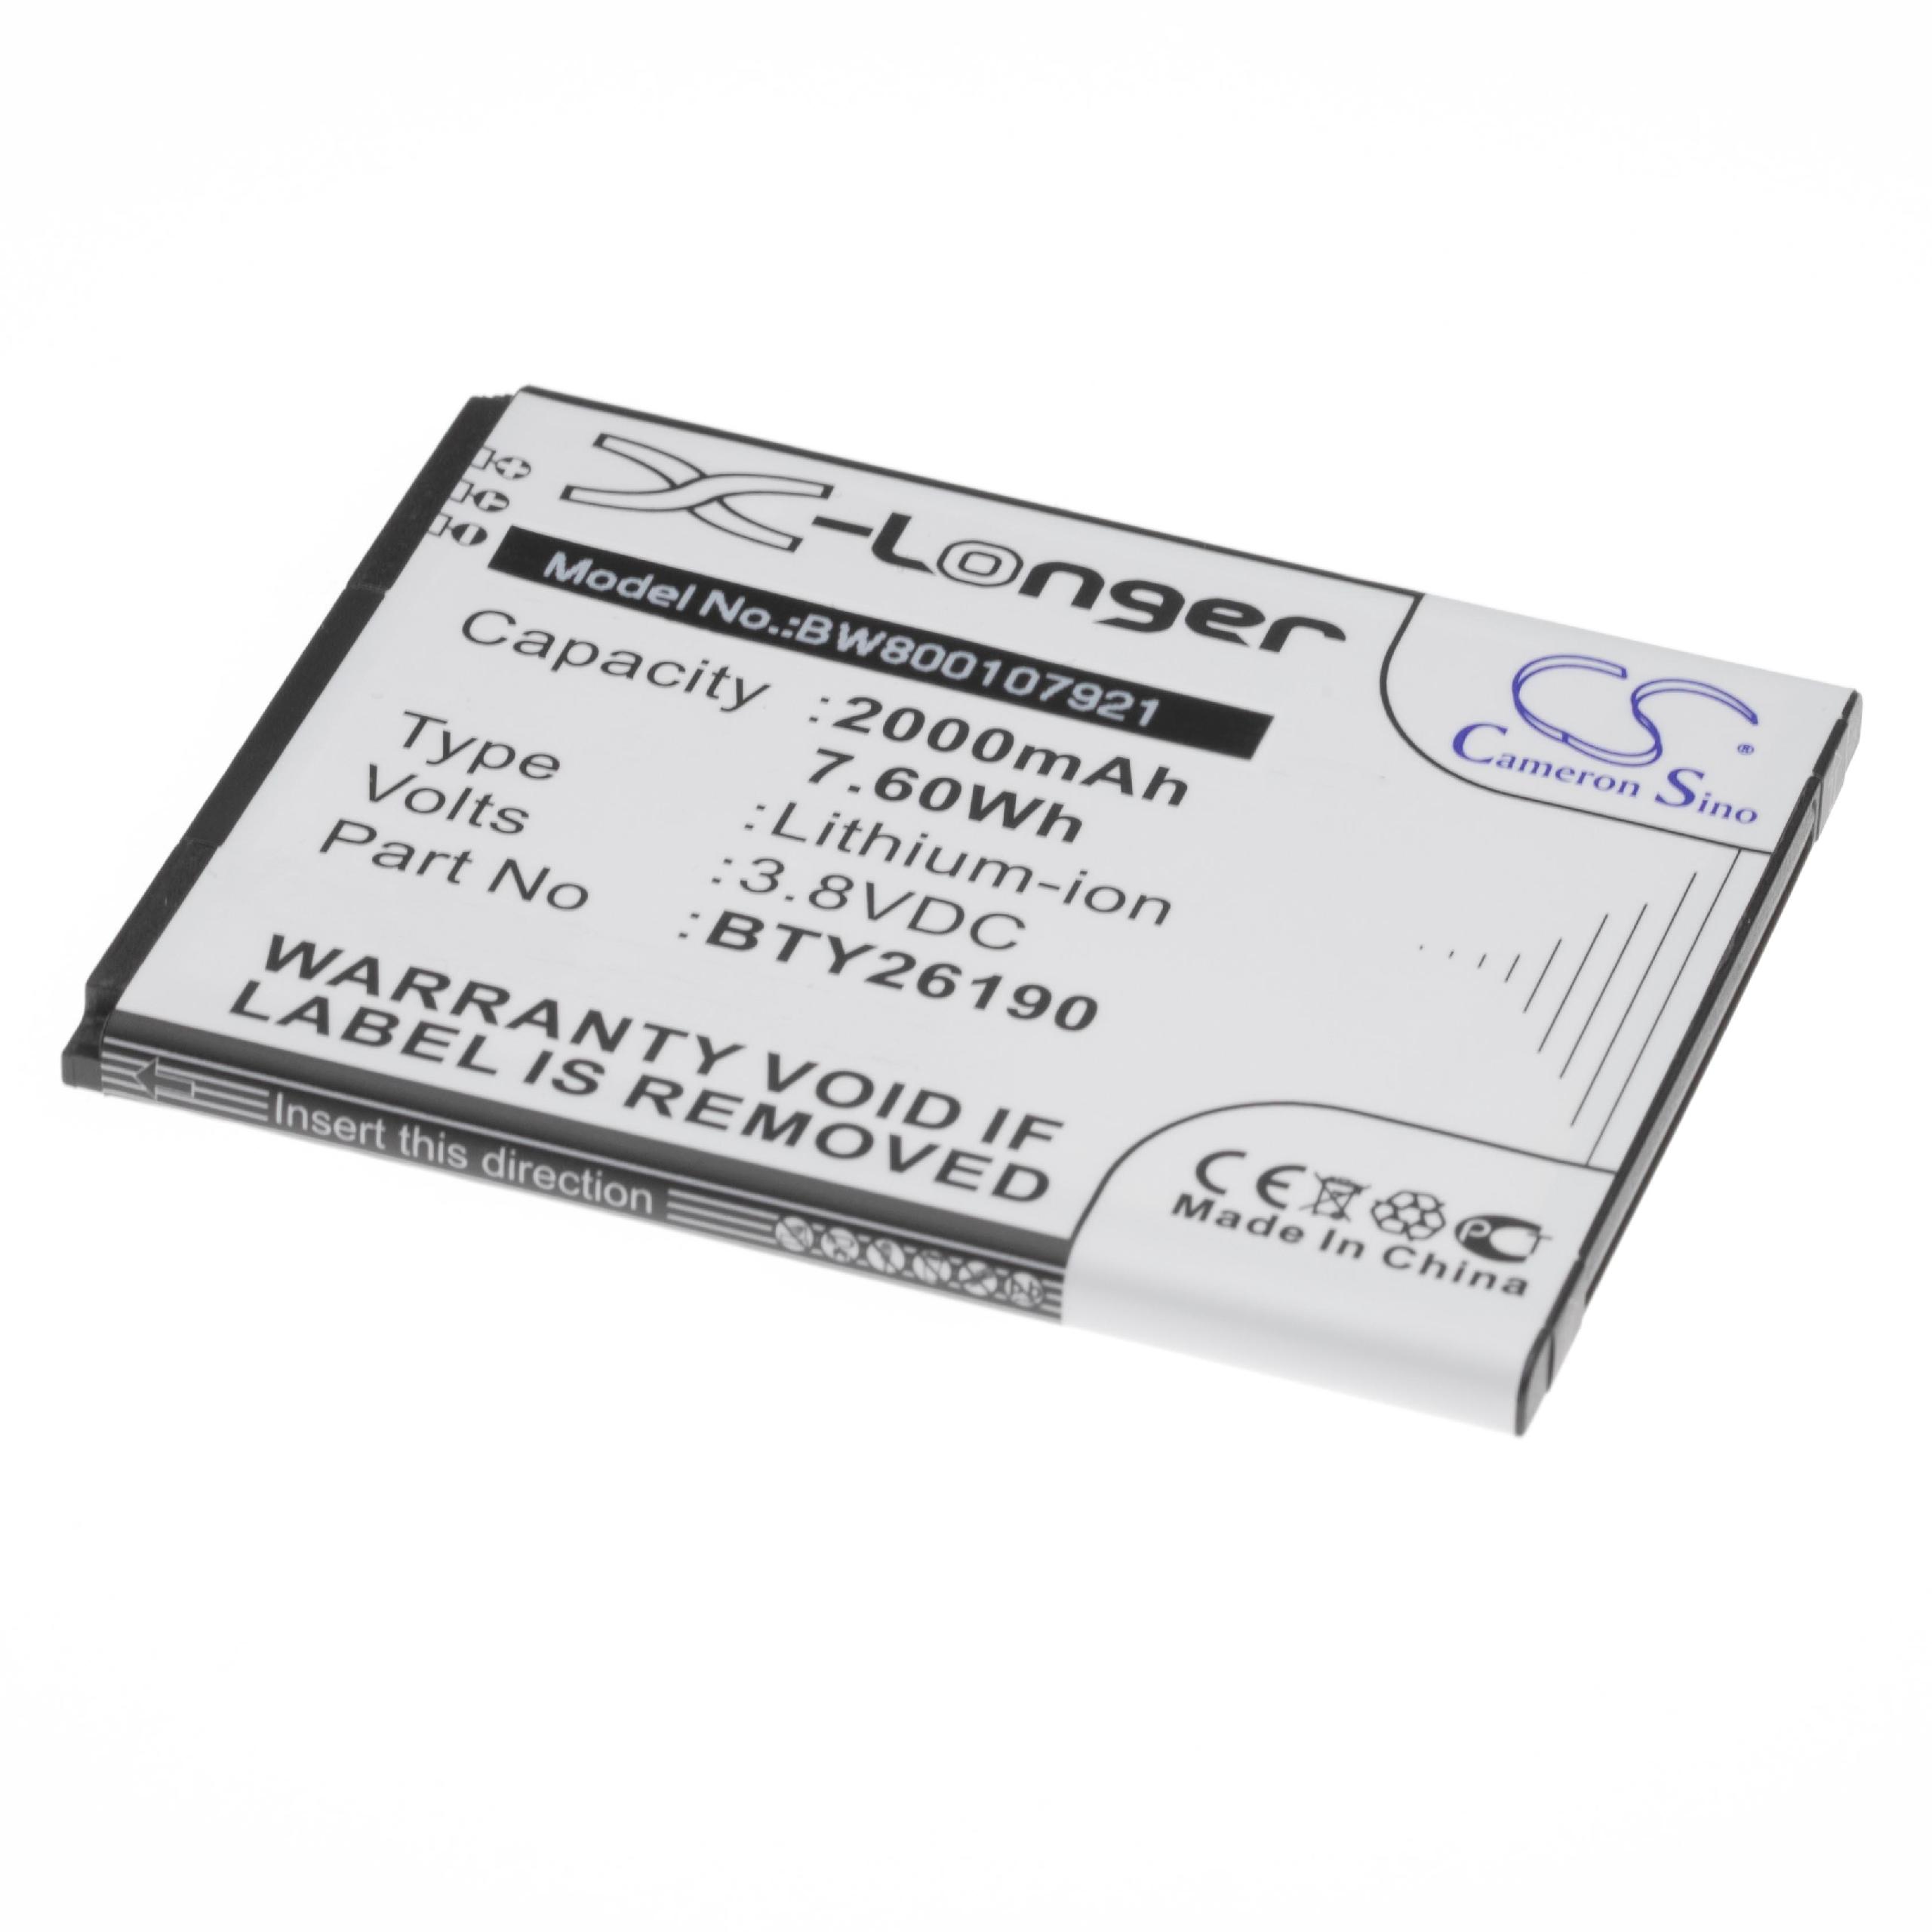 Mobile Phone Battery Replacement for Elson Mobistel BTY26190, BTY26190MOBISTEL/STD - 2000mAh 3.8V Li-Ion